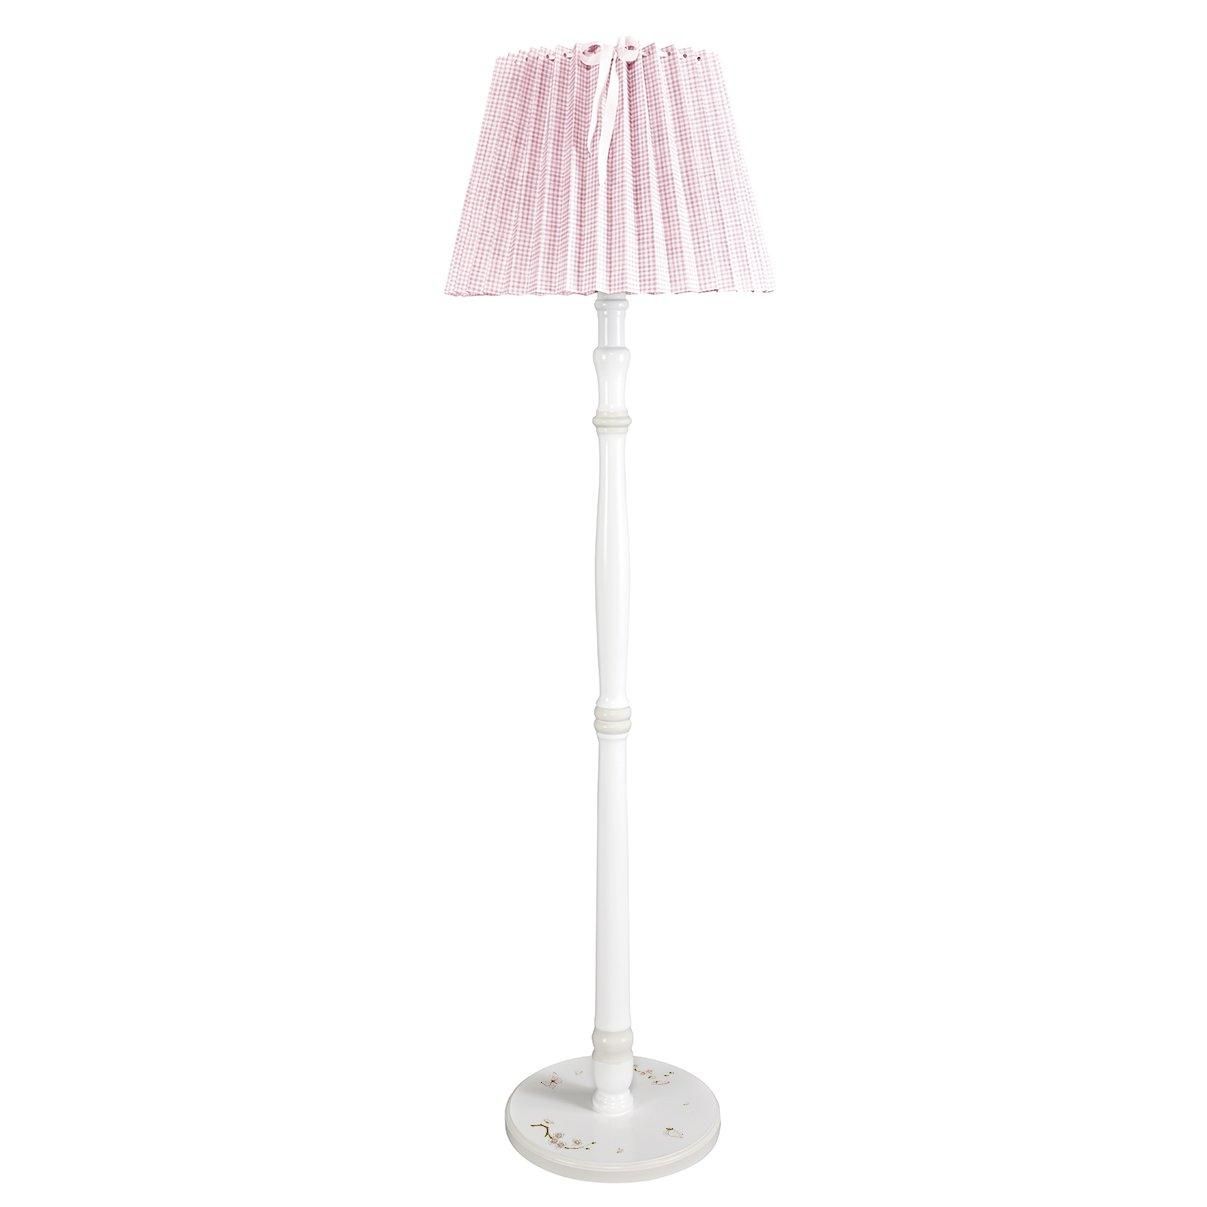 Floor lamp base for girls room with Linen Blossom paintings | Dragons of Walton Street